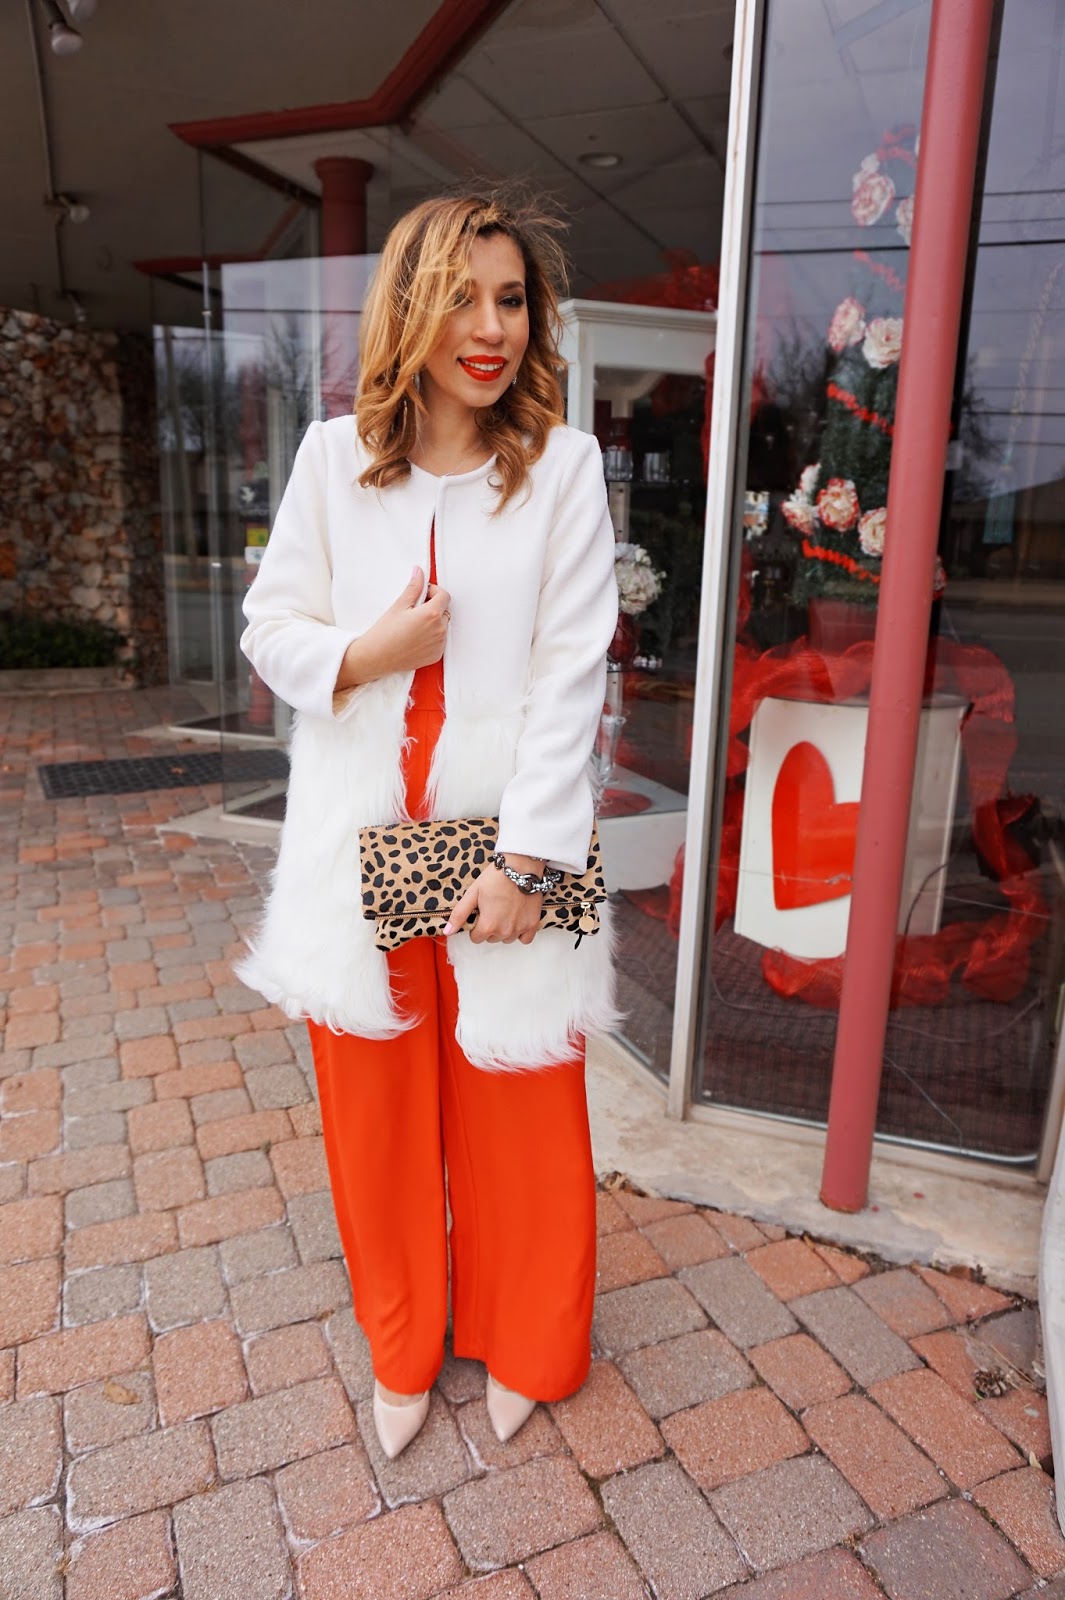 13. Red jumpsuit and white fur jacket.